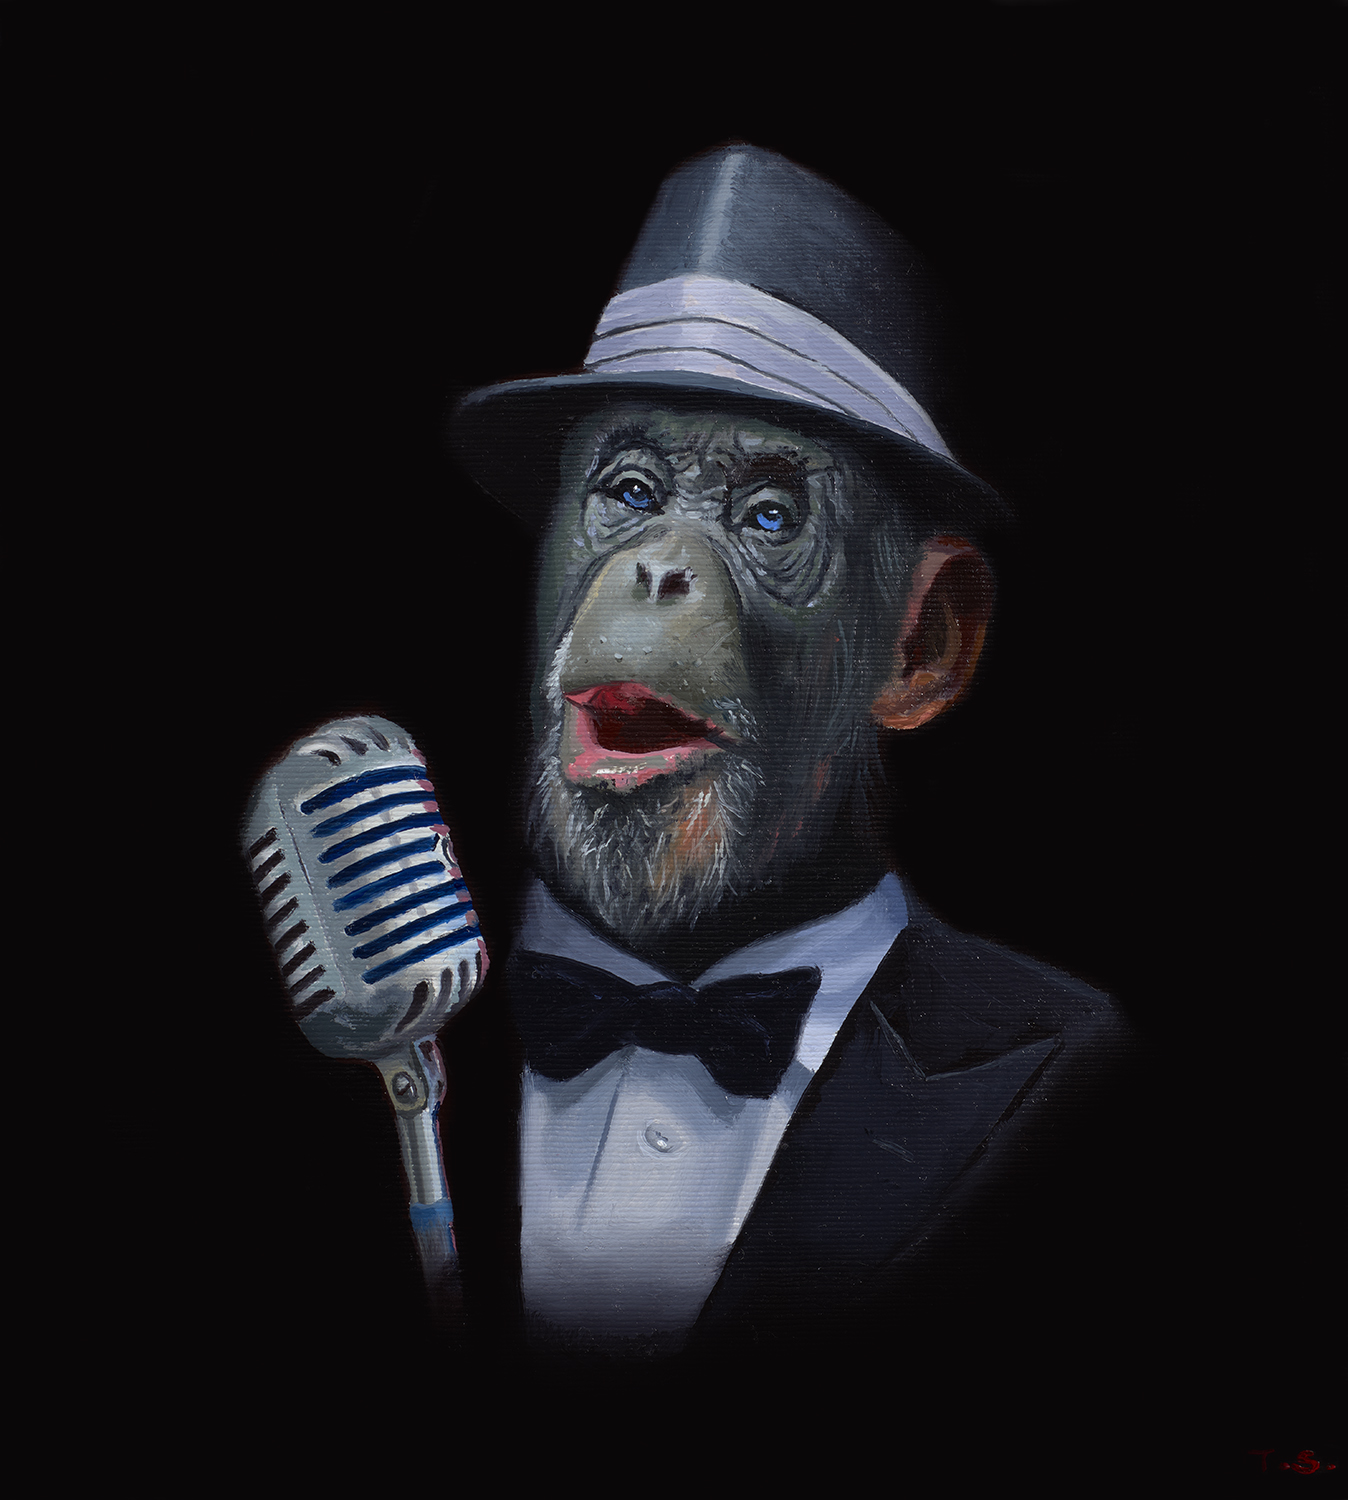 A monkey in a tuxedo in front of a microphone - Tony South - Ol' Blue Eyes